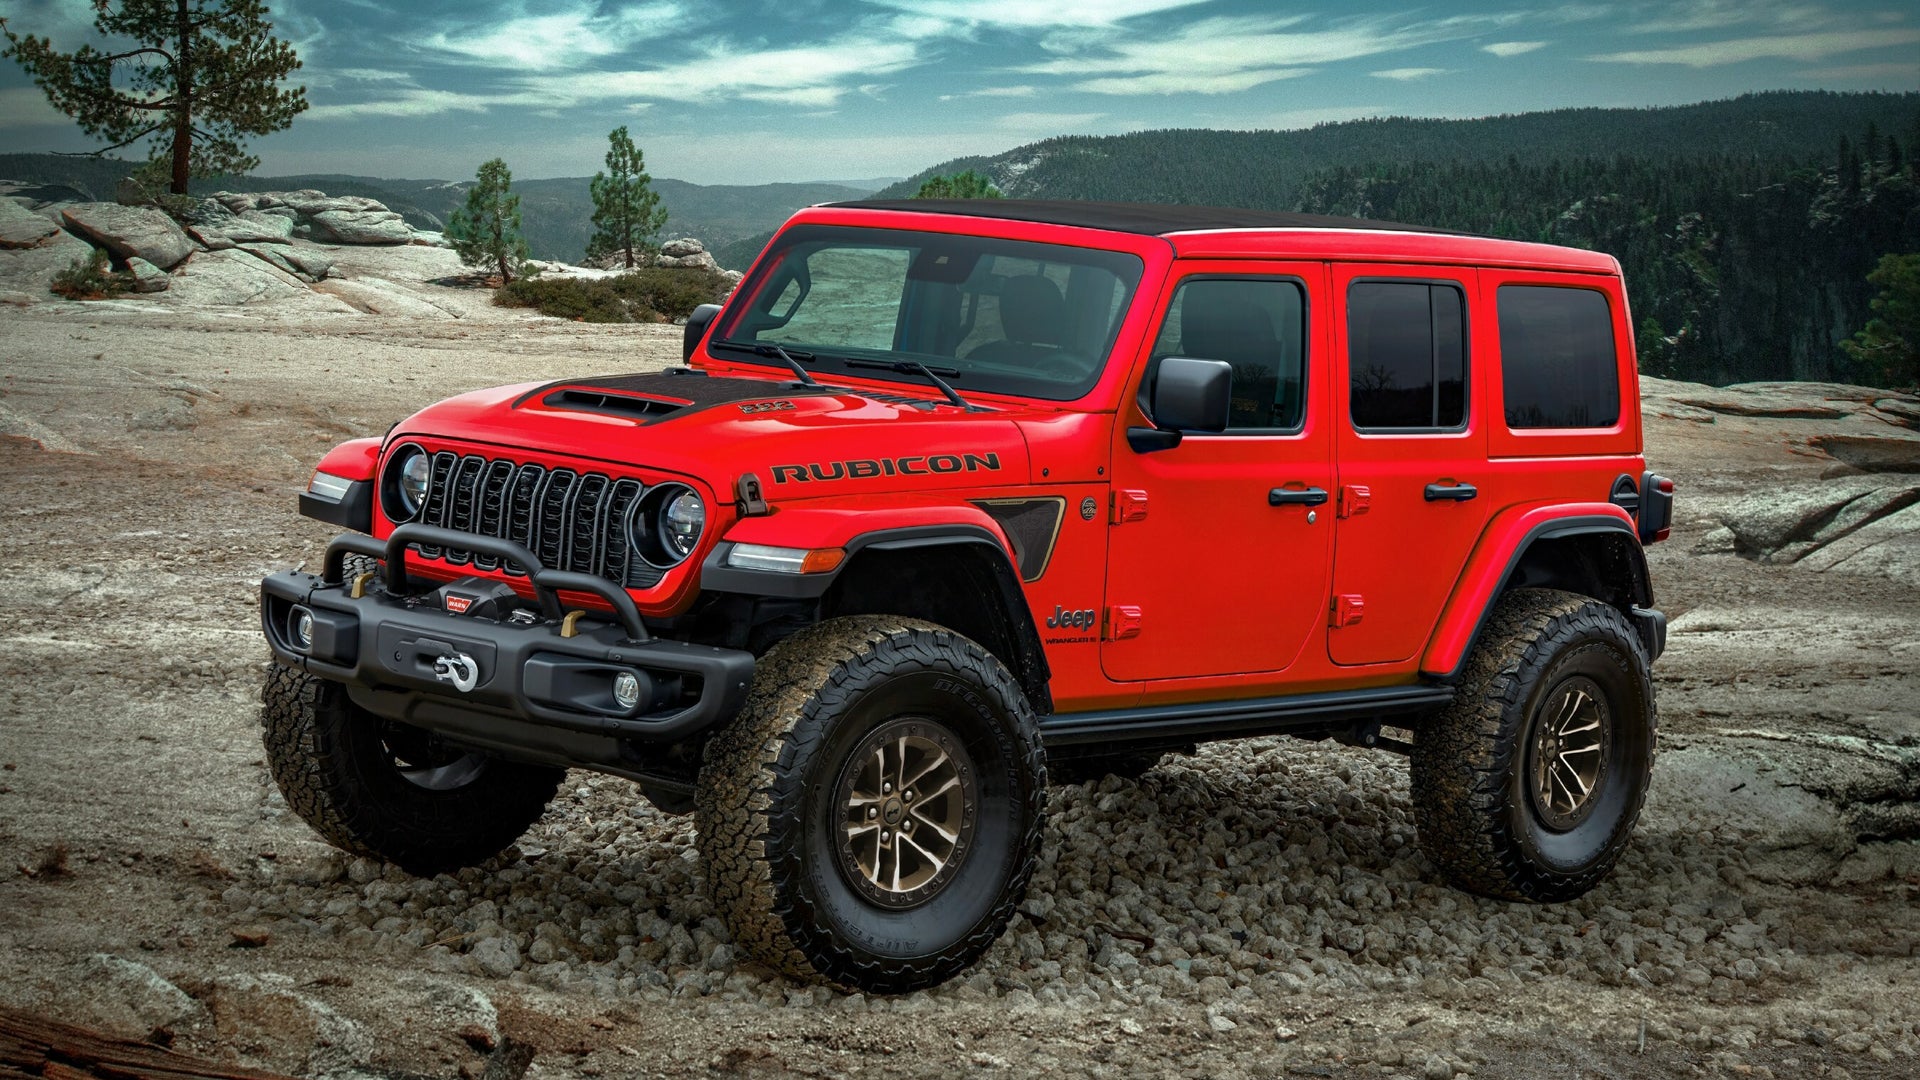 The final edition of the Jeep Wrangler 392 V8 bids farewell at a price of $102,000.